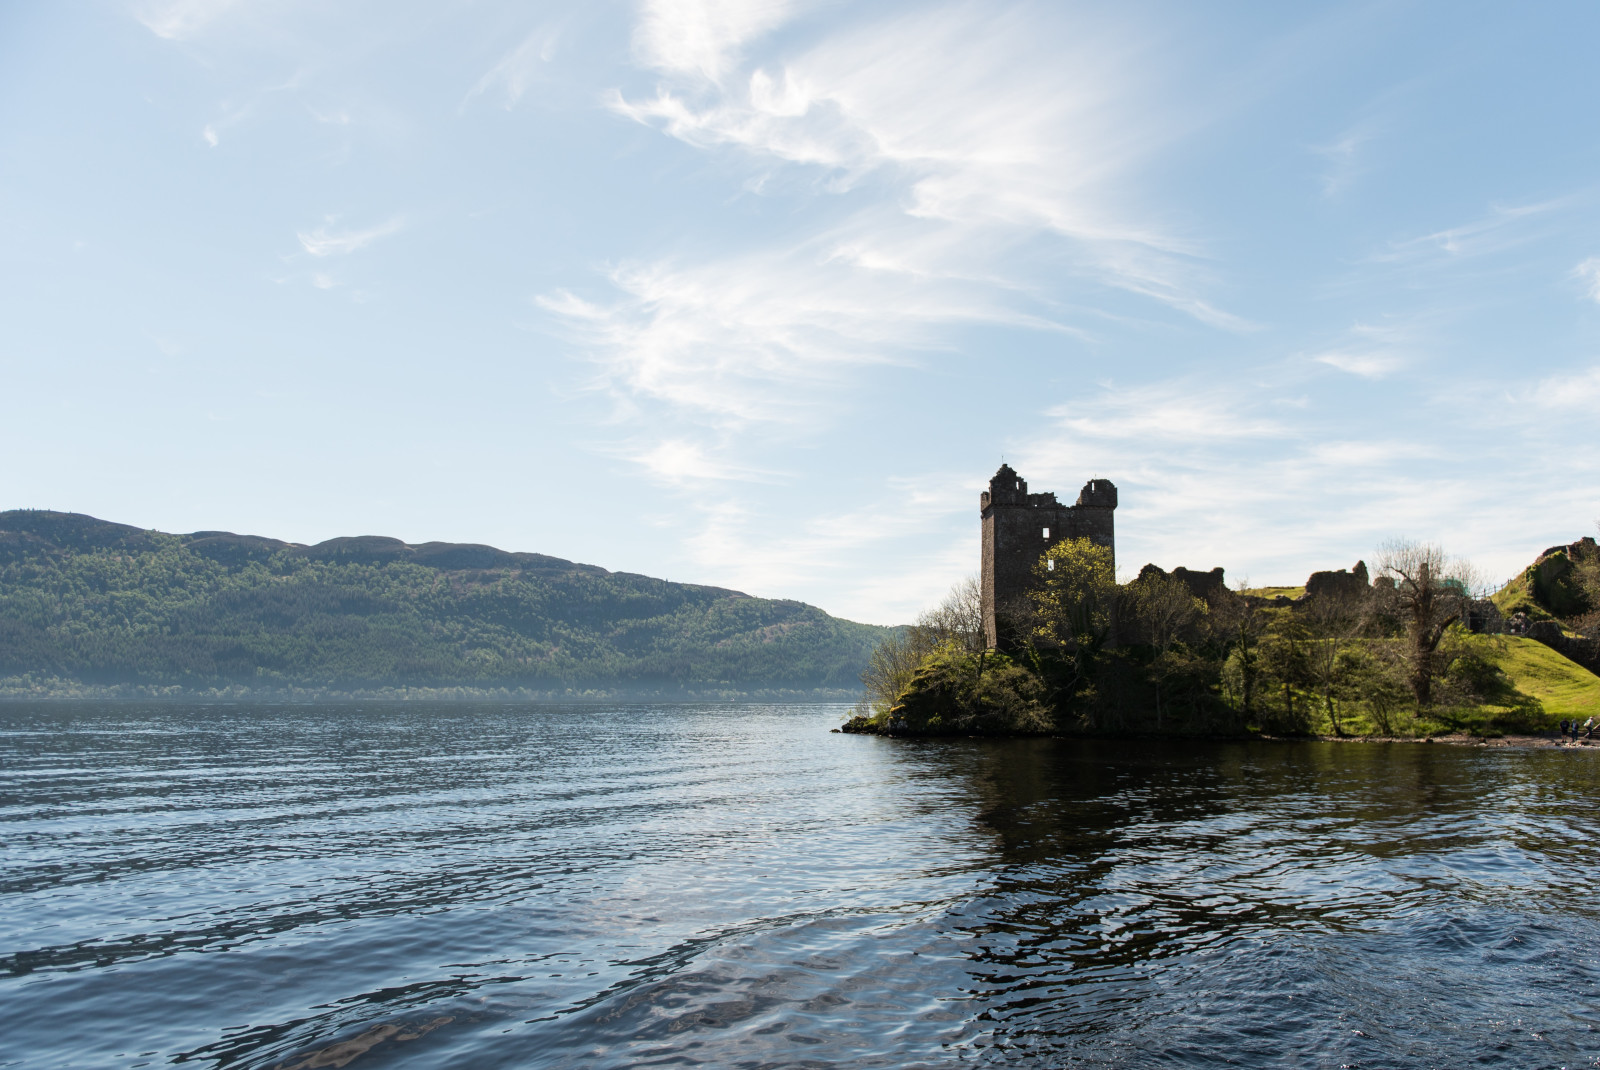 Loch Ness lake in Scotland with blue calm waters and brown castle ruins and on a hill with green grass and more hills in the distance.